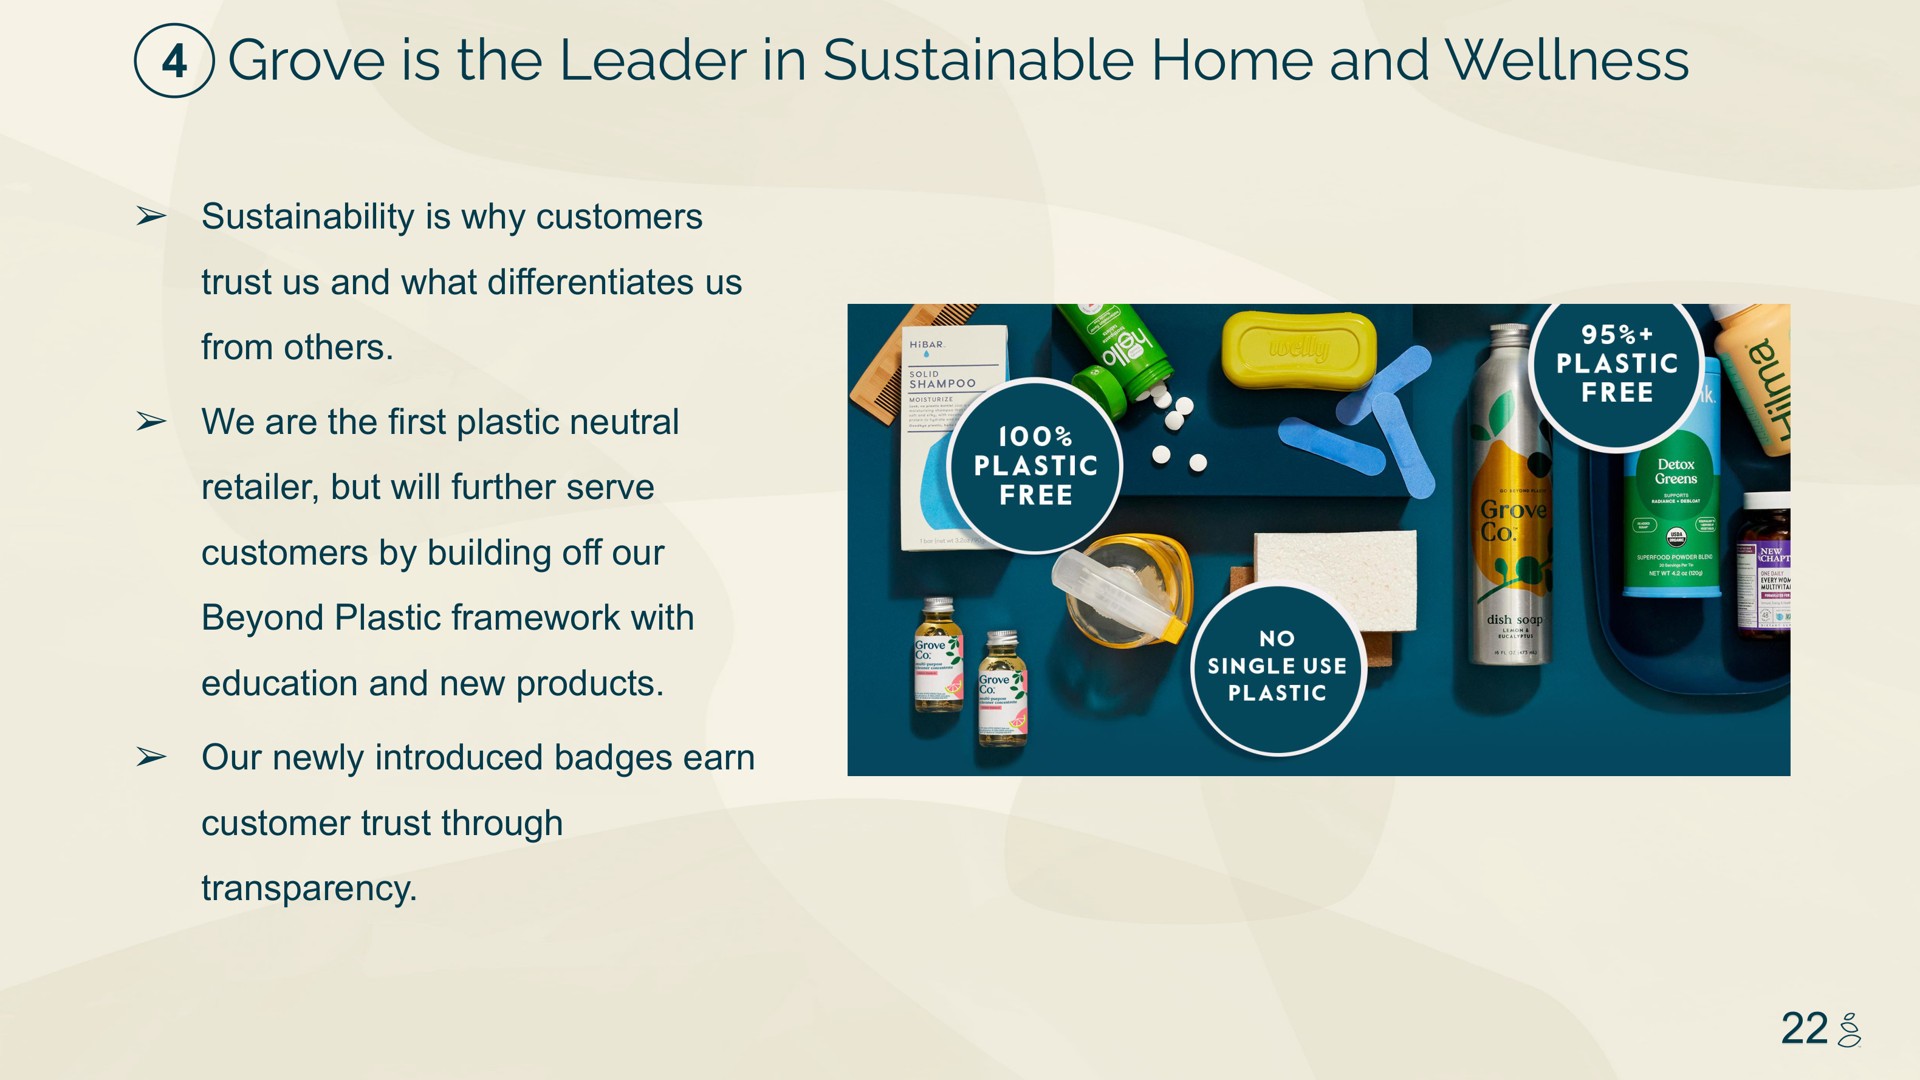 grove is the leader in sustainable home and wellness is why customers trust us and what differentiates us from we are the first plastic neutral retailer but will further serve customers by building off our beyond plastic framework with education and new products our newly introduced badges earn customer trust through transparency | Grove